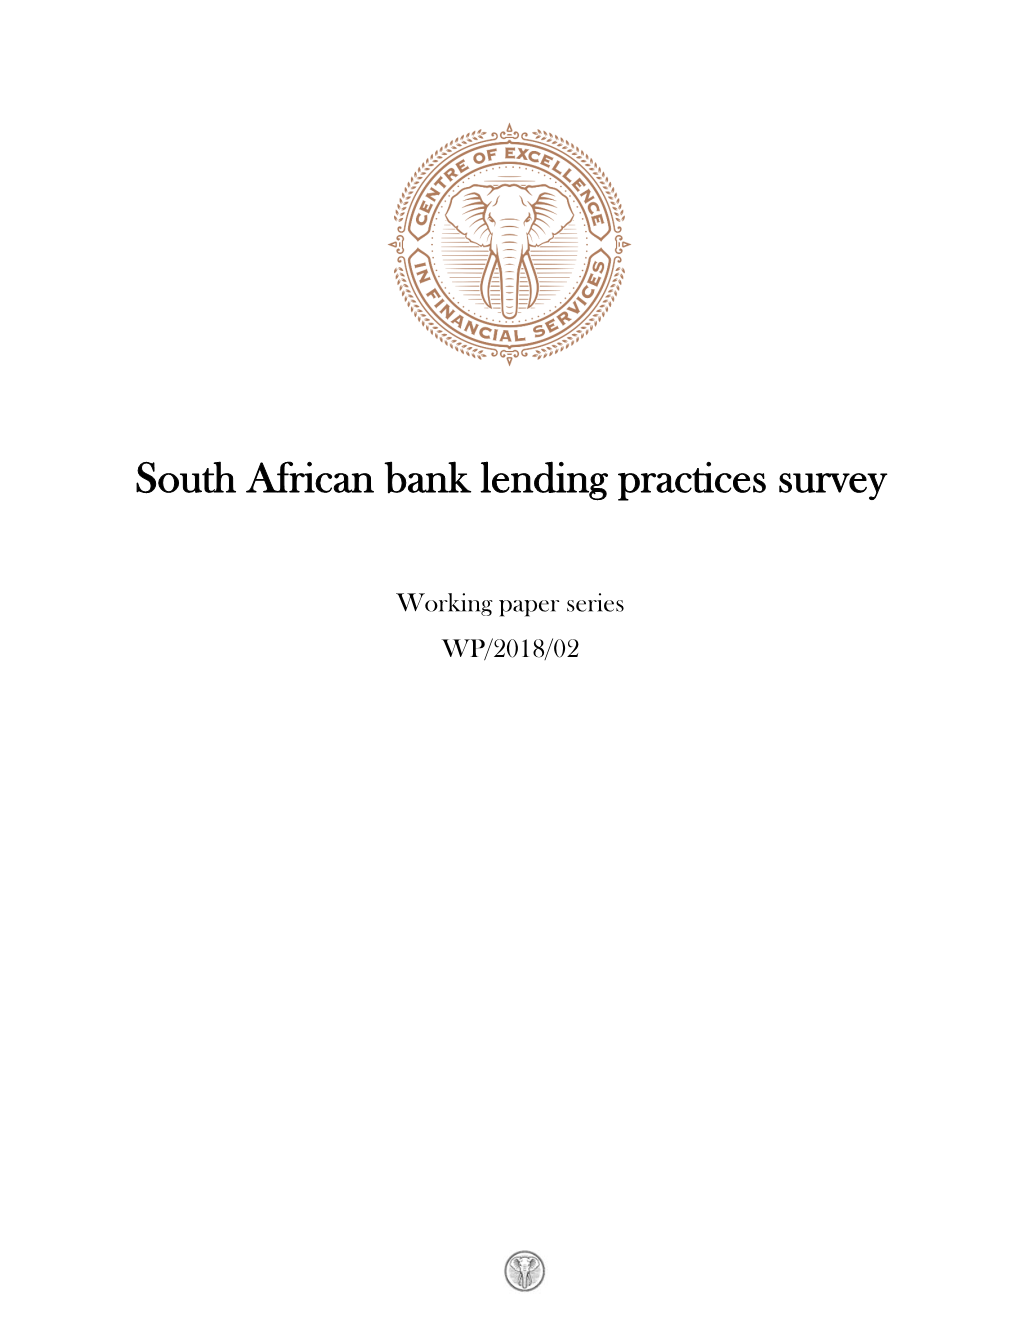 South African Bank Lending Practices Survey Working Paper